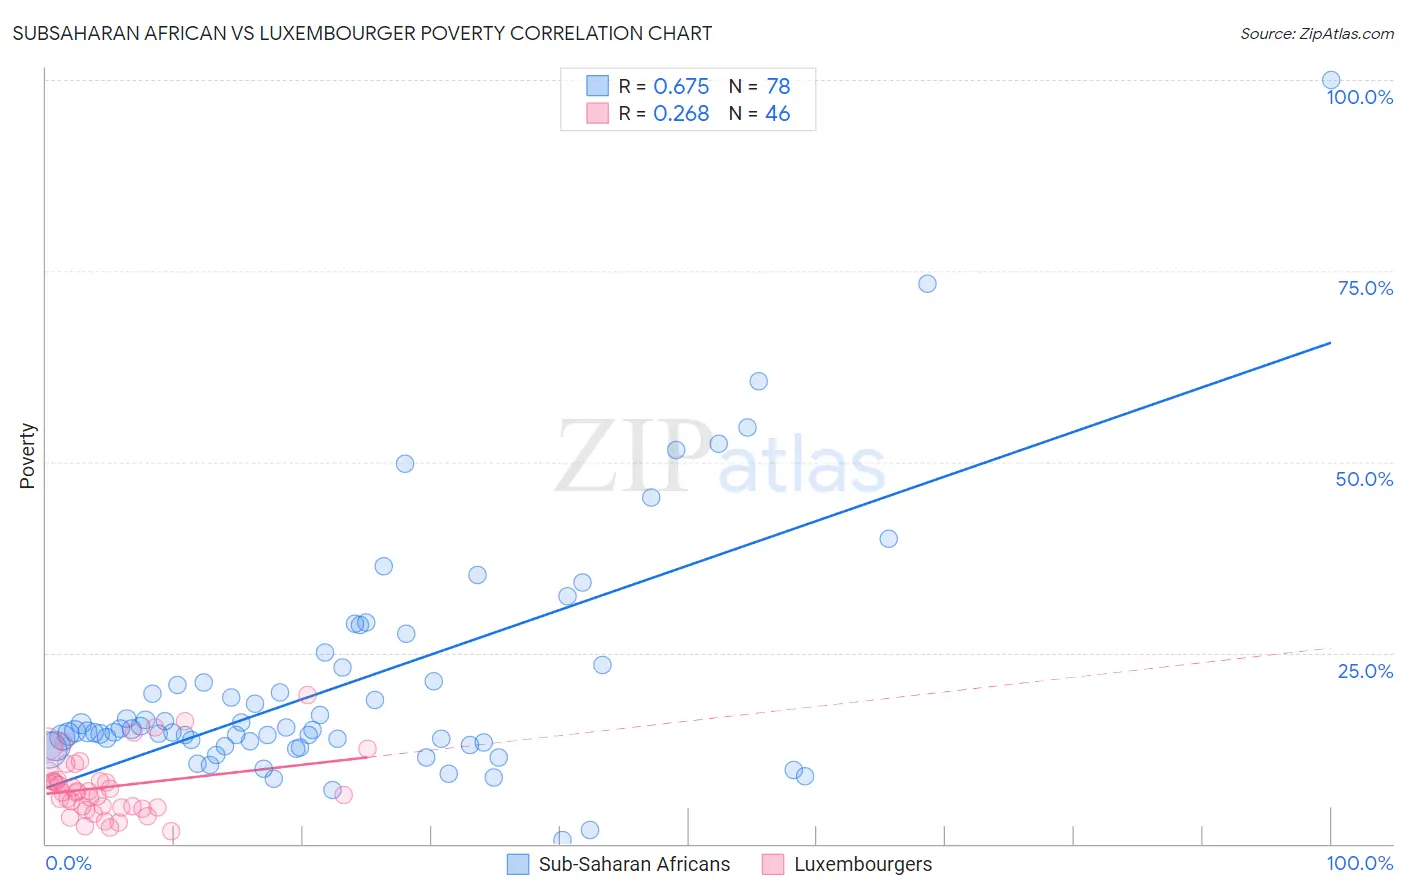 Subsaharan African vs Luxembourger Poverty